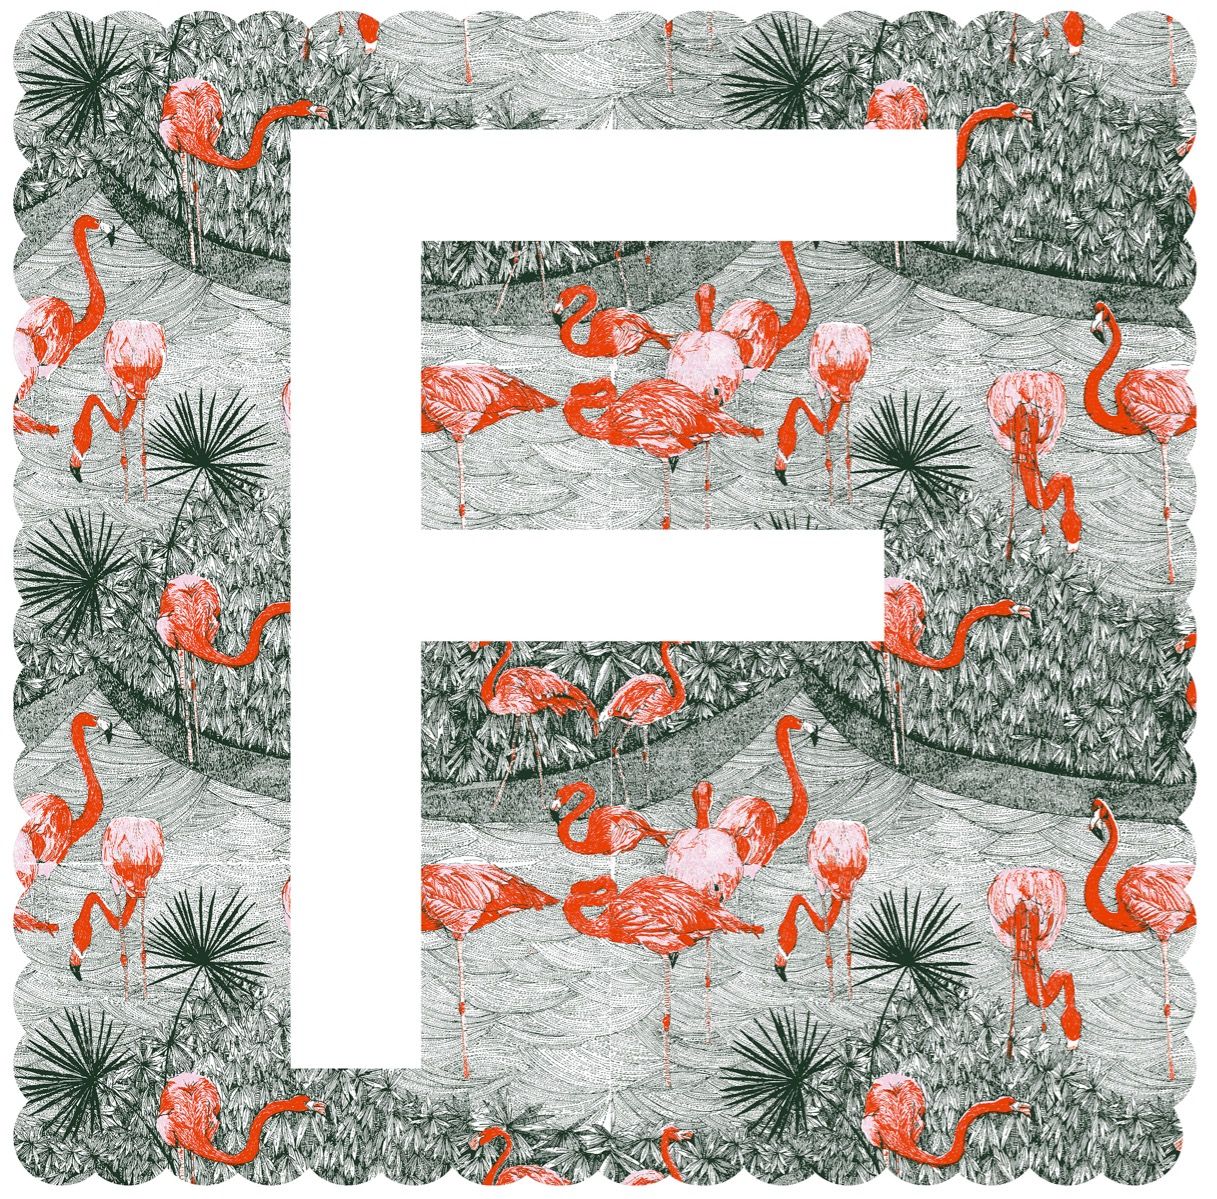 F is for Flamingo by Clare Halifax